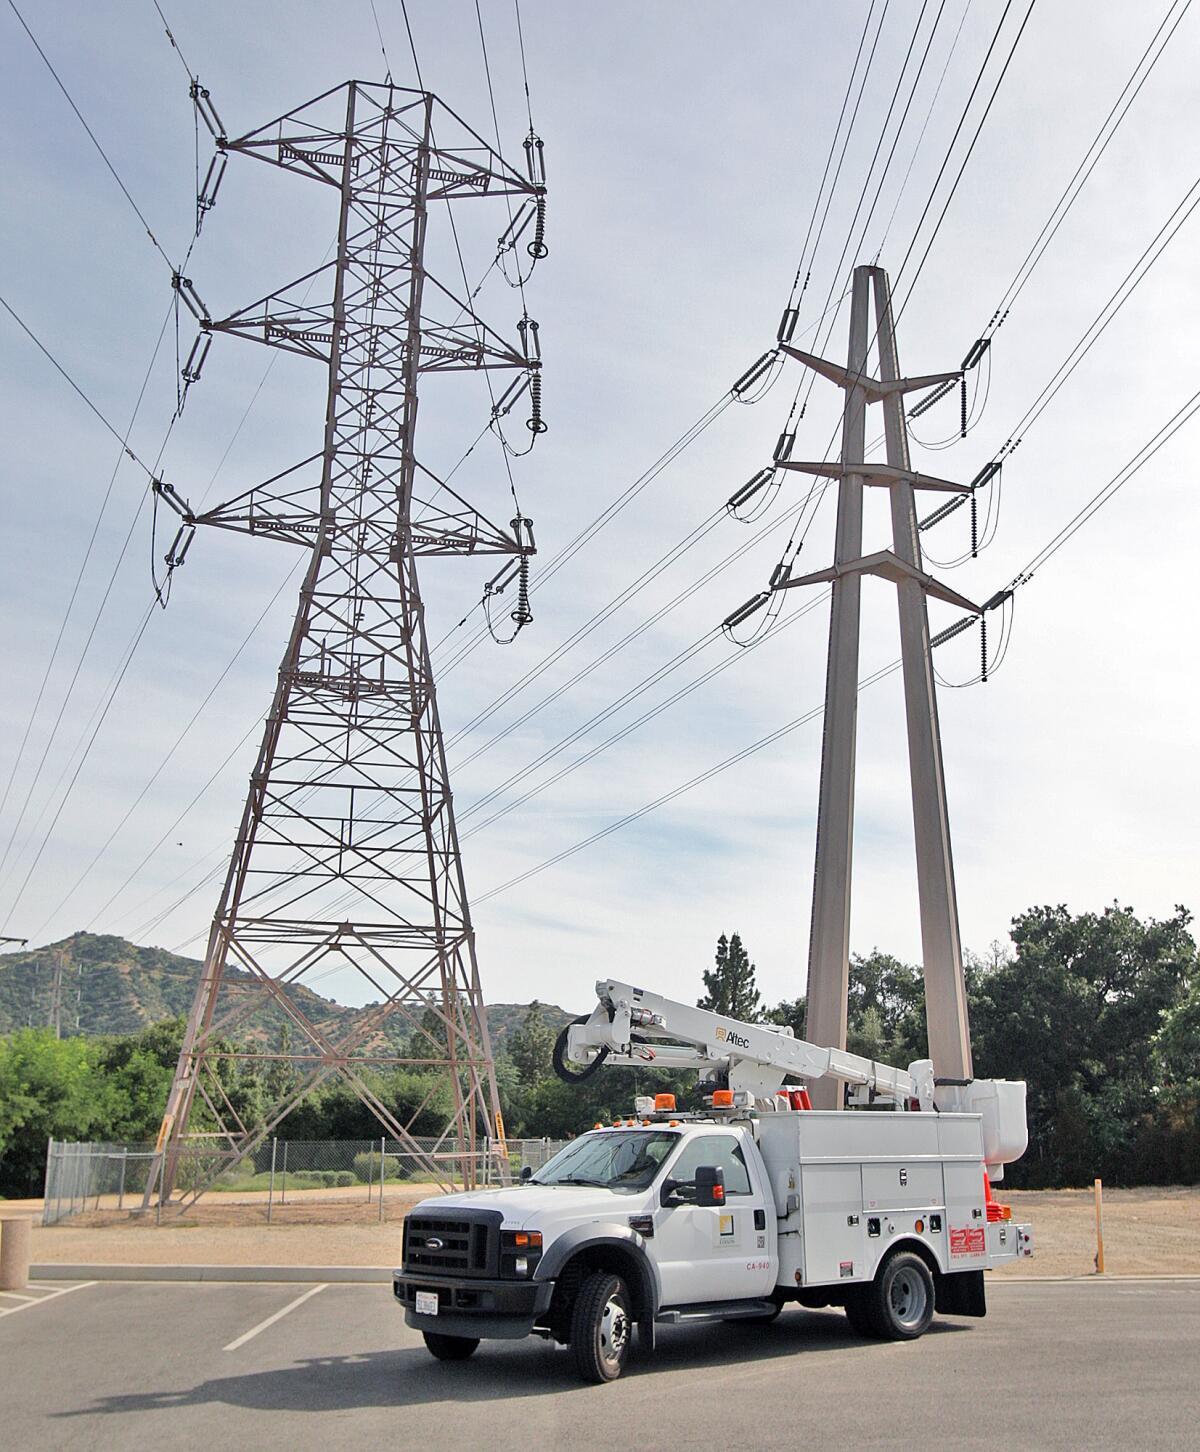 The City Council will examine Tuesday improvements made by Southern California Edison since a 2017 consultant's report found residents experienced 2,371 power outages between 2006 and 2016.